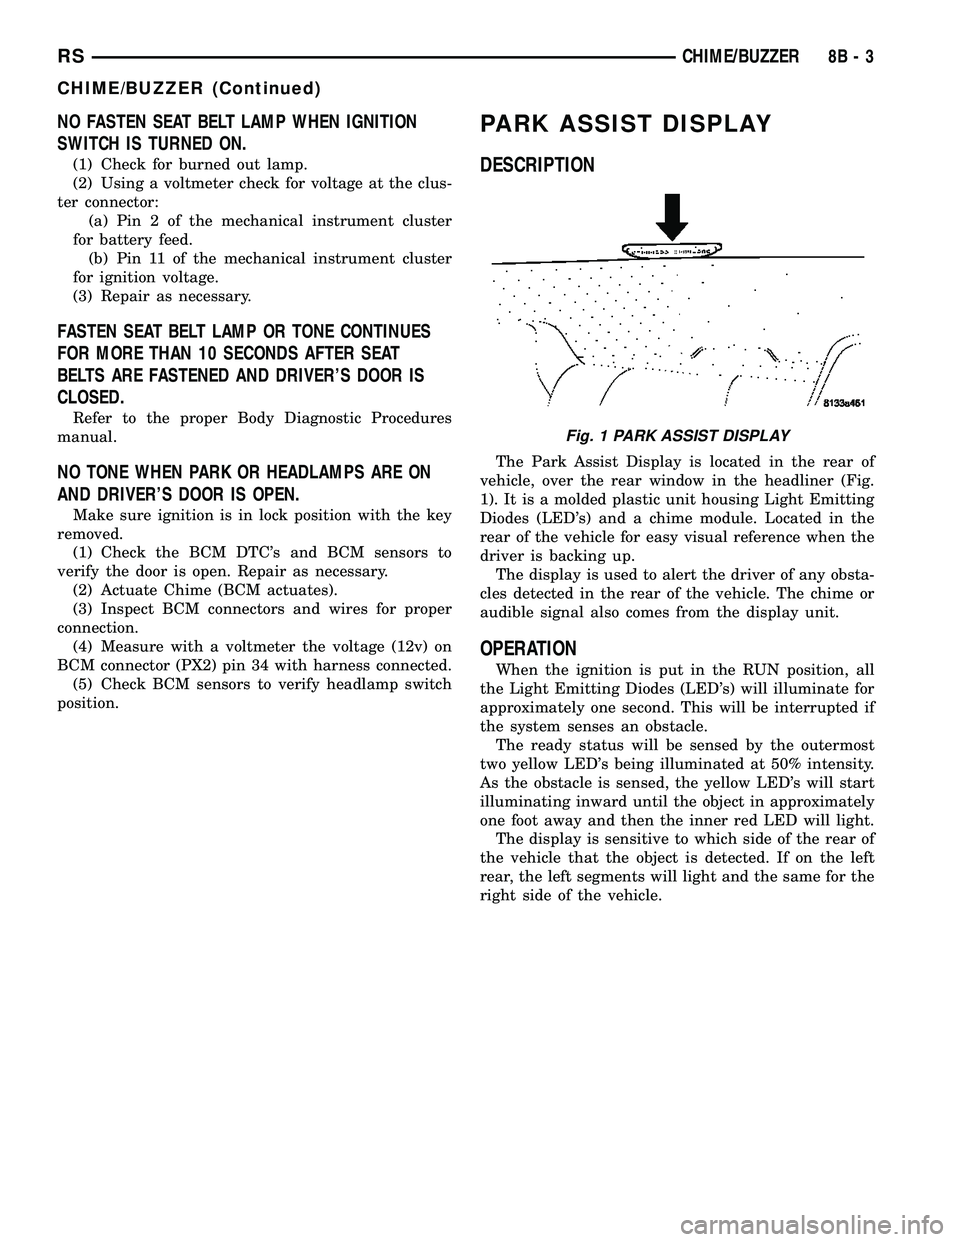 CHRYSLER VOYAGER 2005  Service Manual NO FASTEN SEAT BELT LAMP WHEN IGNITION
SWITCH IS TURNED ON.
(1) Check for burned out lamp.
(2) Using a voltmeter check for voltage at the clus-
ter connector:
(a) Pin 2 of the mechanical instrument cl